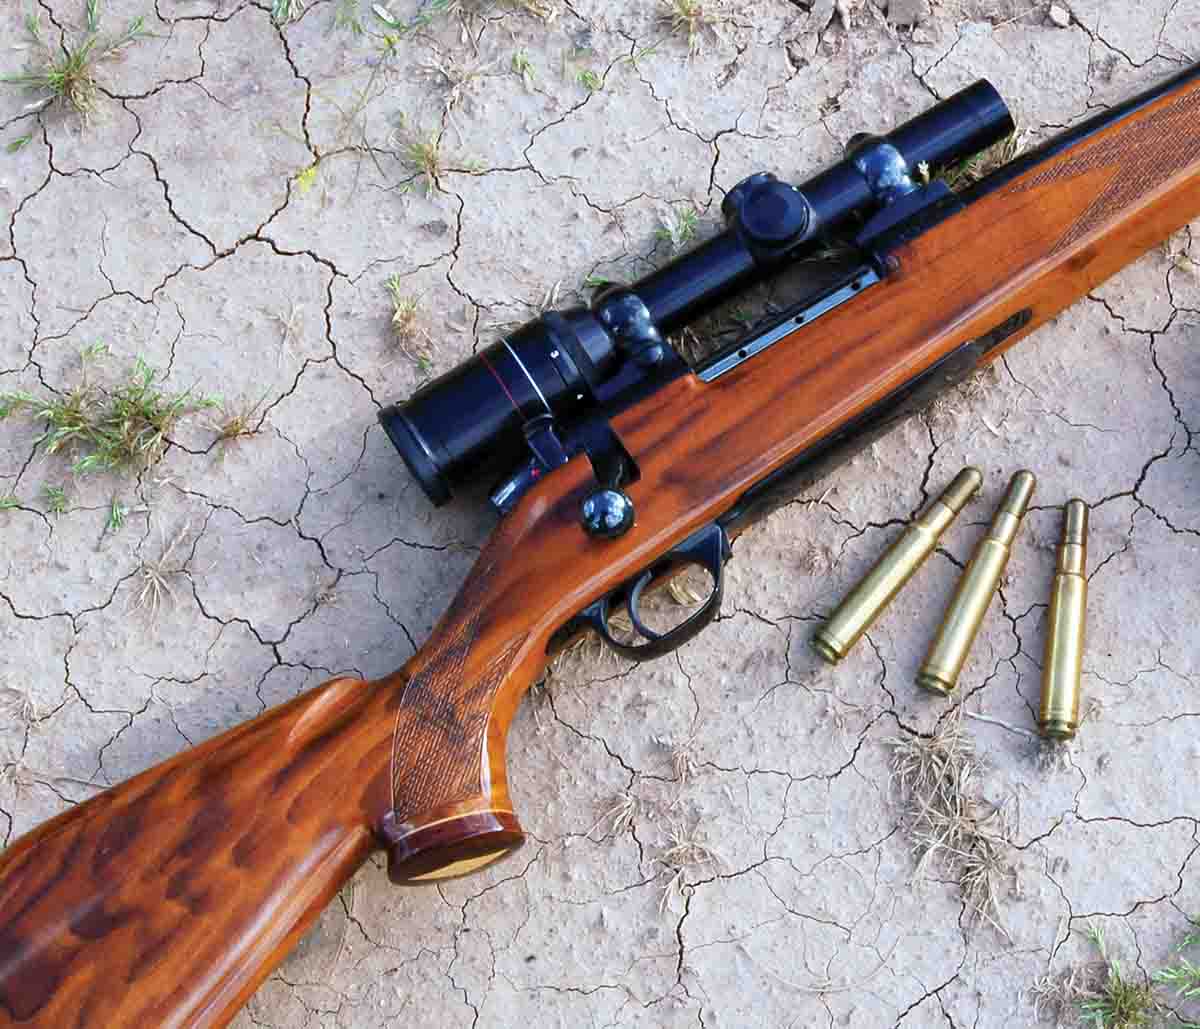 The .416 Weatherby Magnum cartridge was made for large and dangerous game.